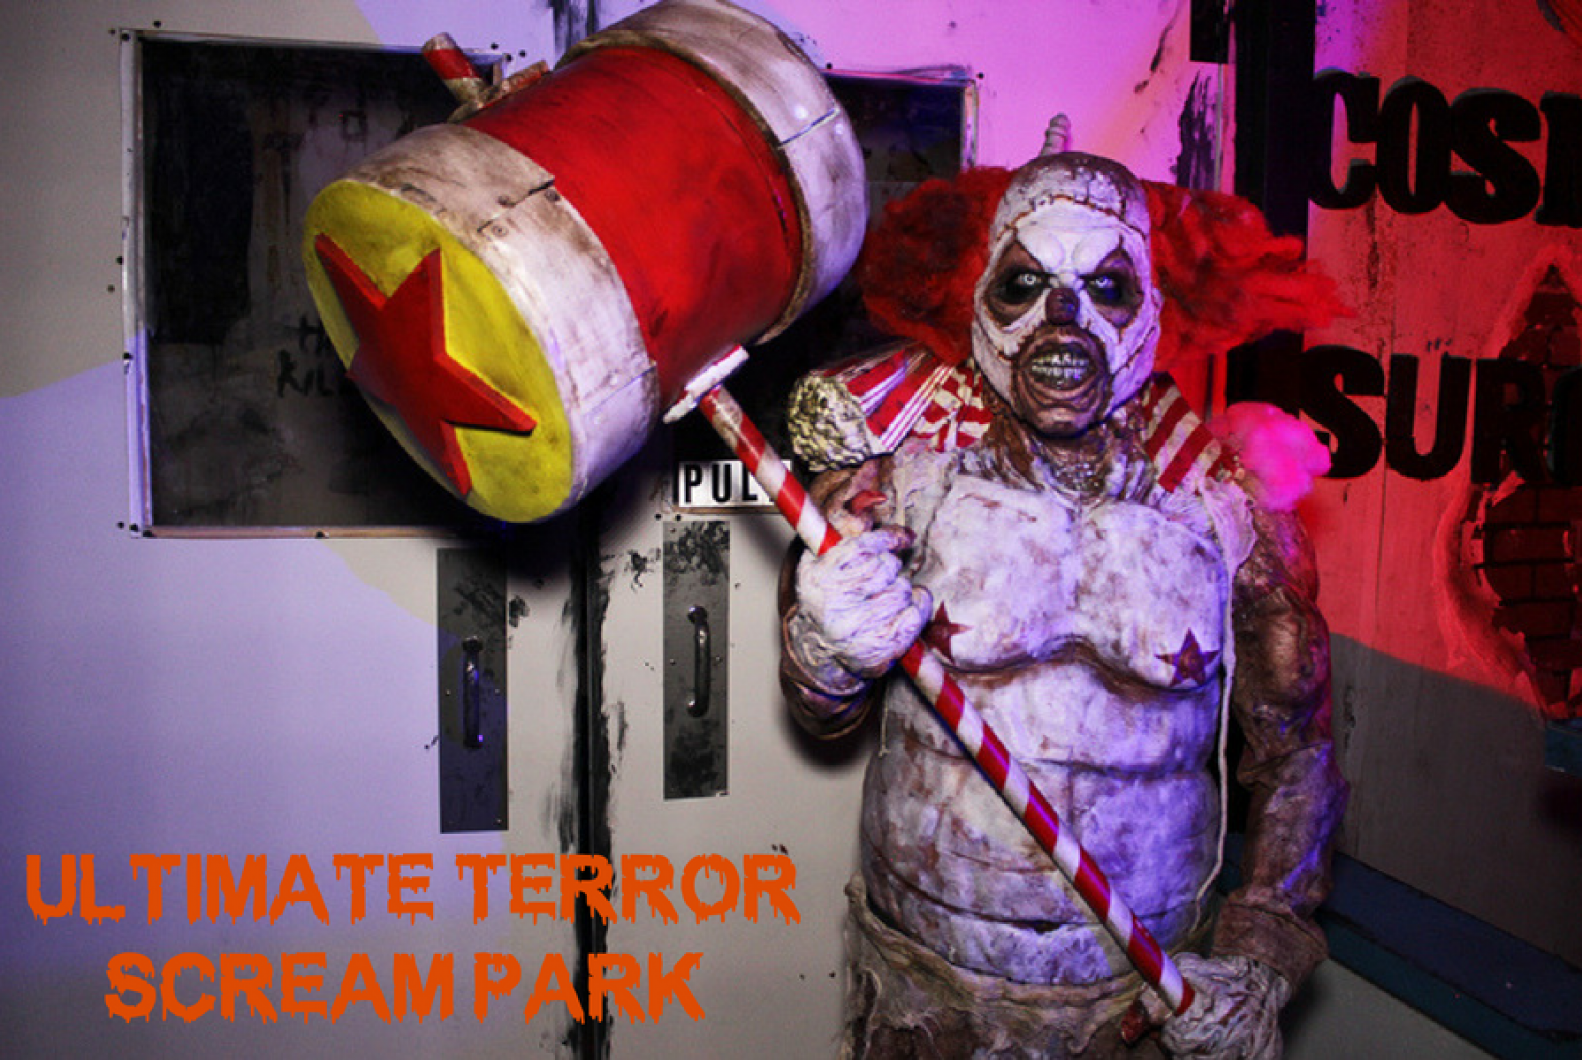 The Ultimate Terror Scream Park features three different haunted houses, including an abandoned hospital, an industrial plant and the house of a murderer. (Courtesy of Ultimate Terror Scream Park)